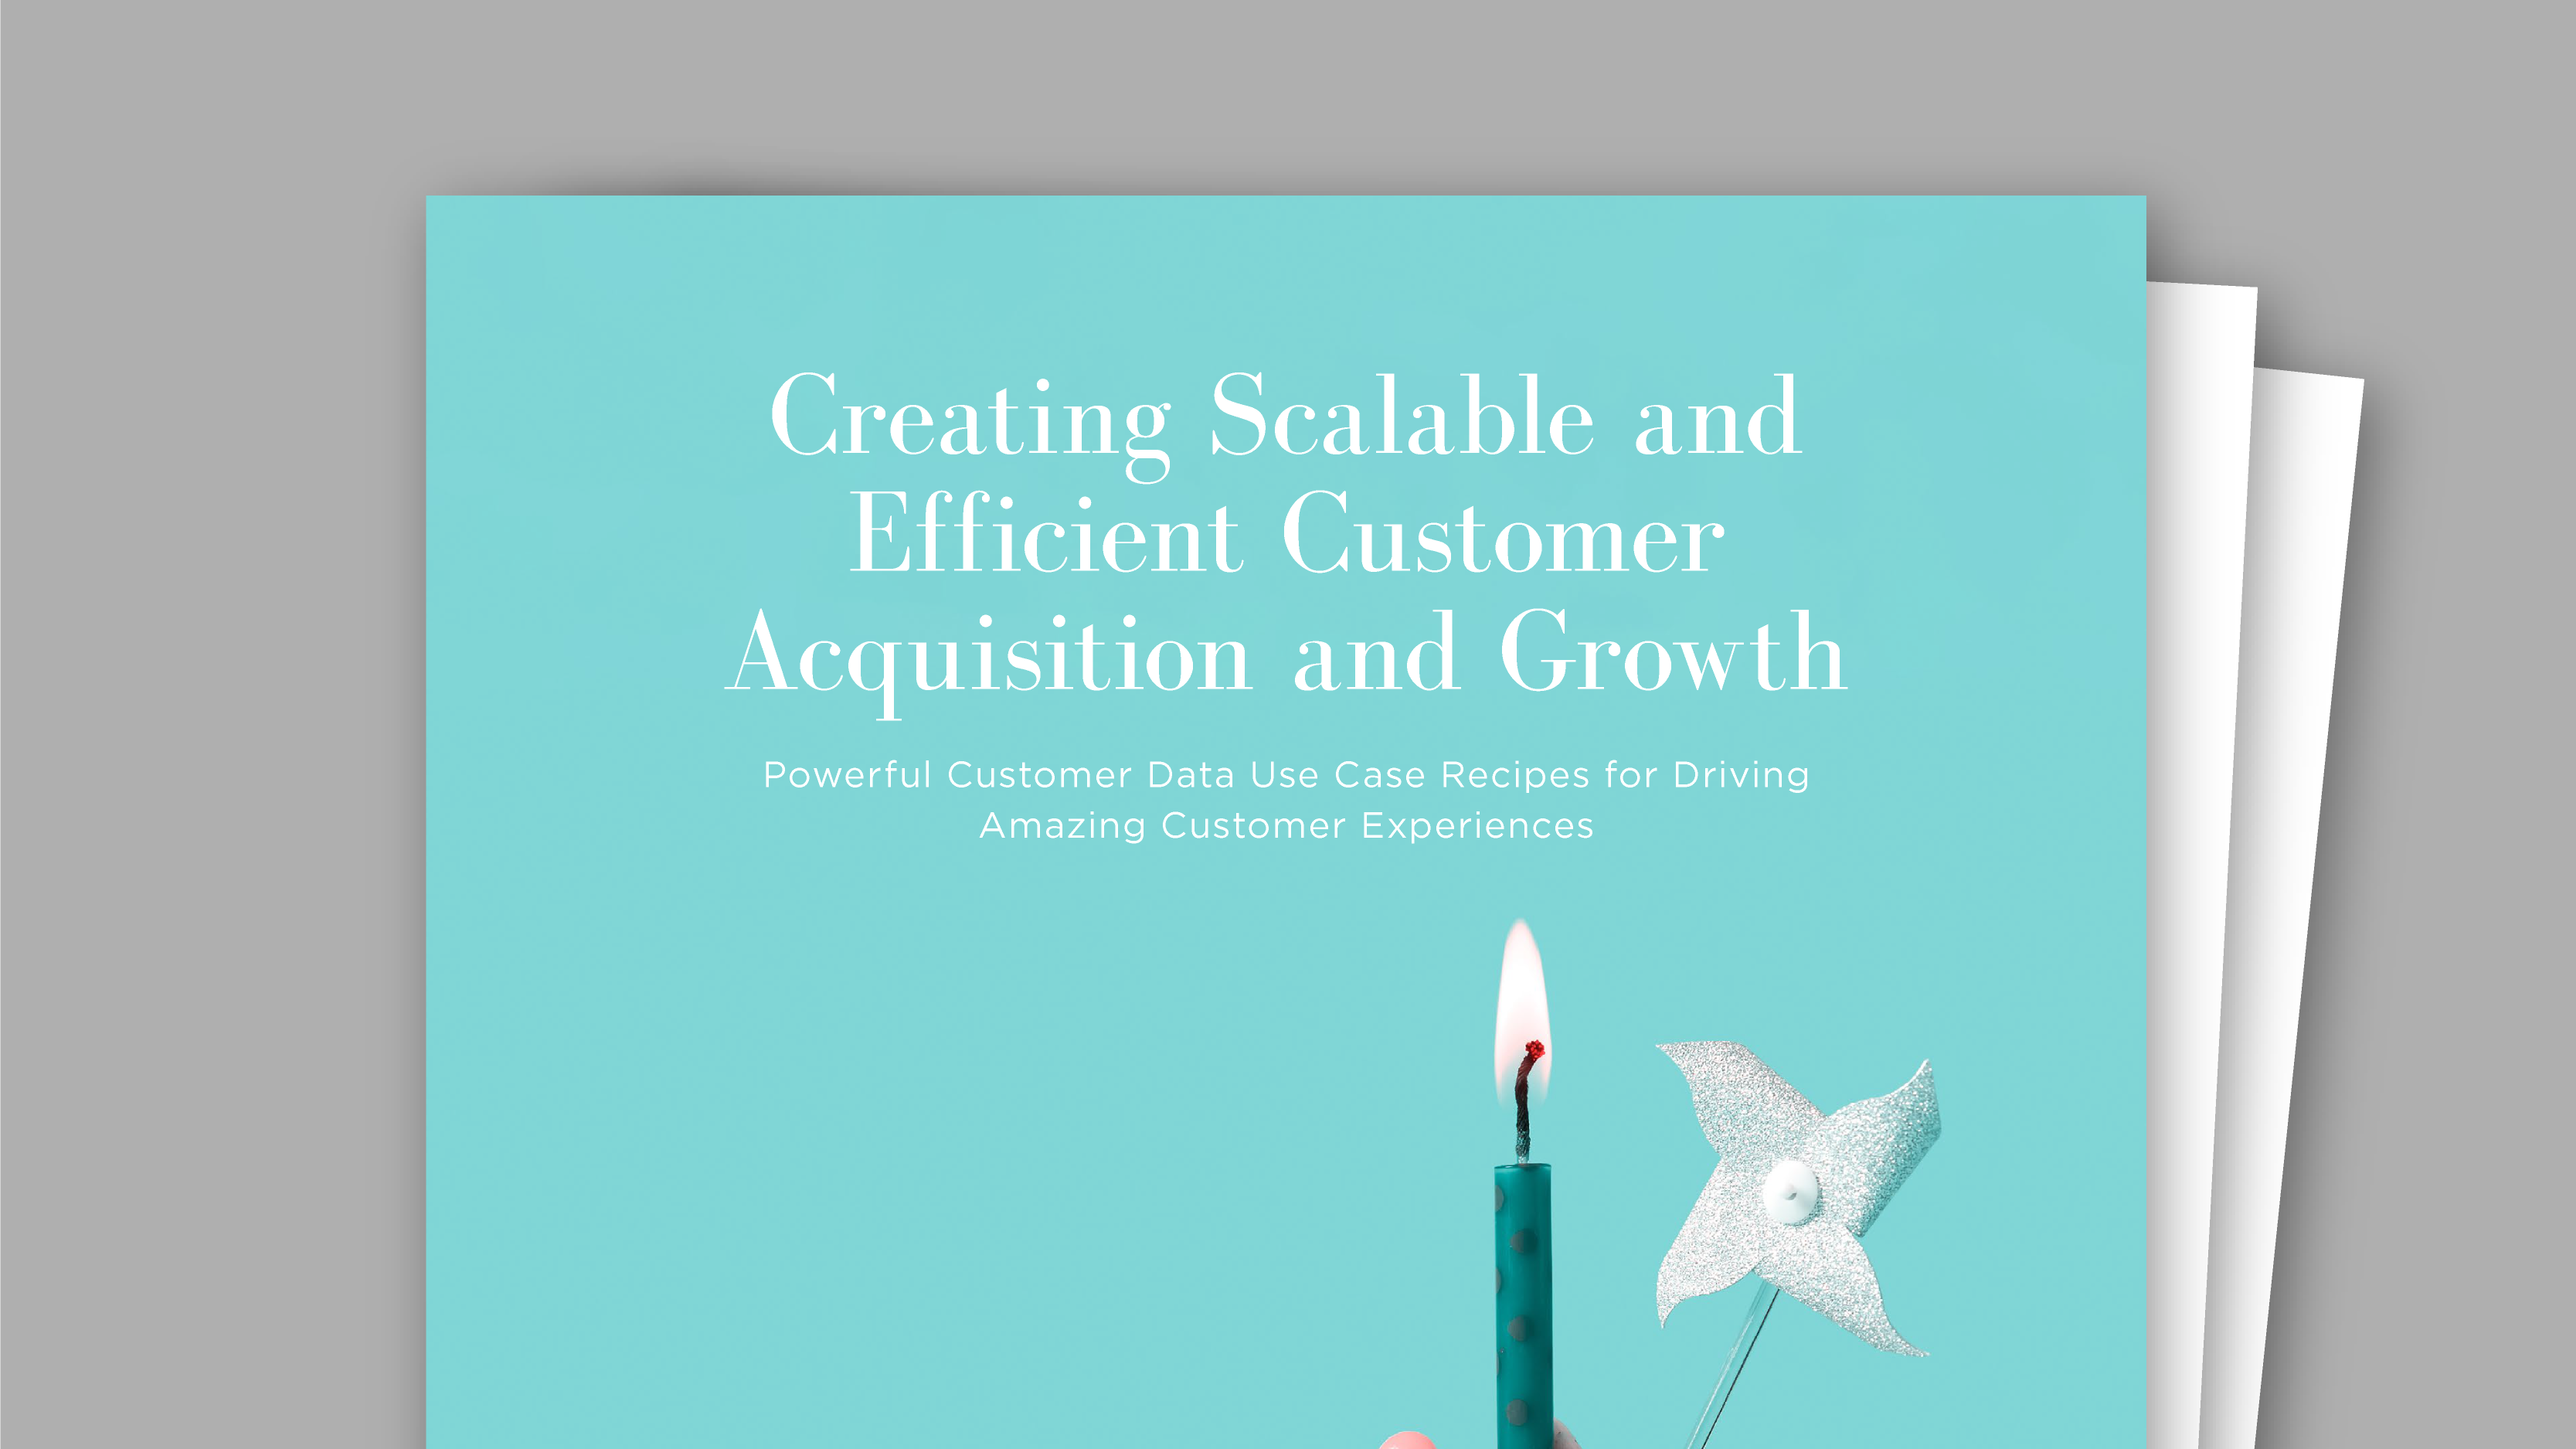 Creating Scalable and Efficient Customer Acquisition and Growth